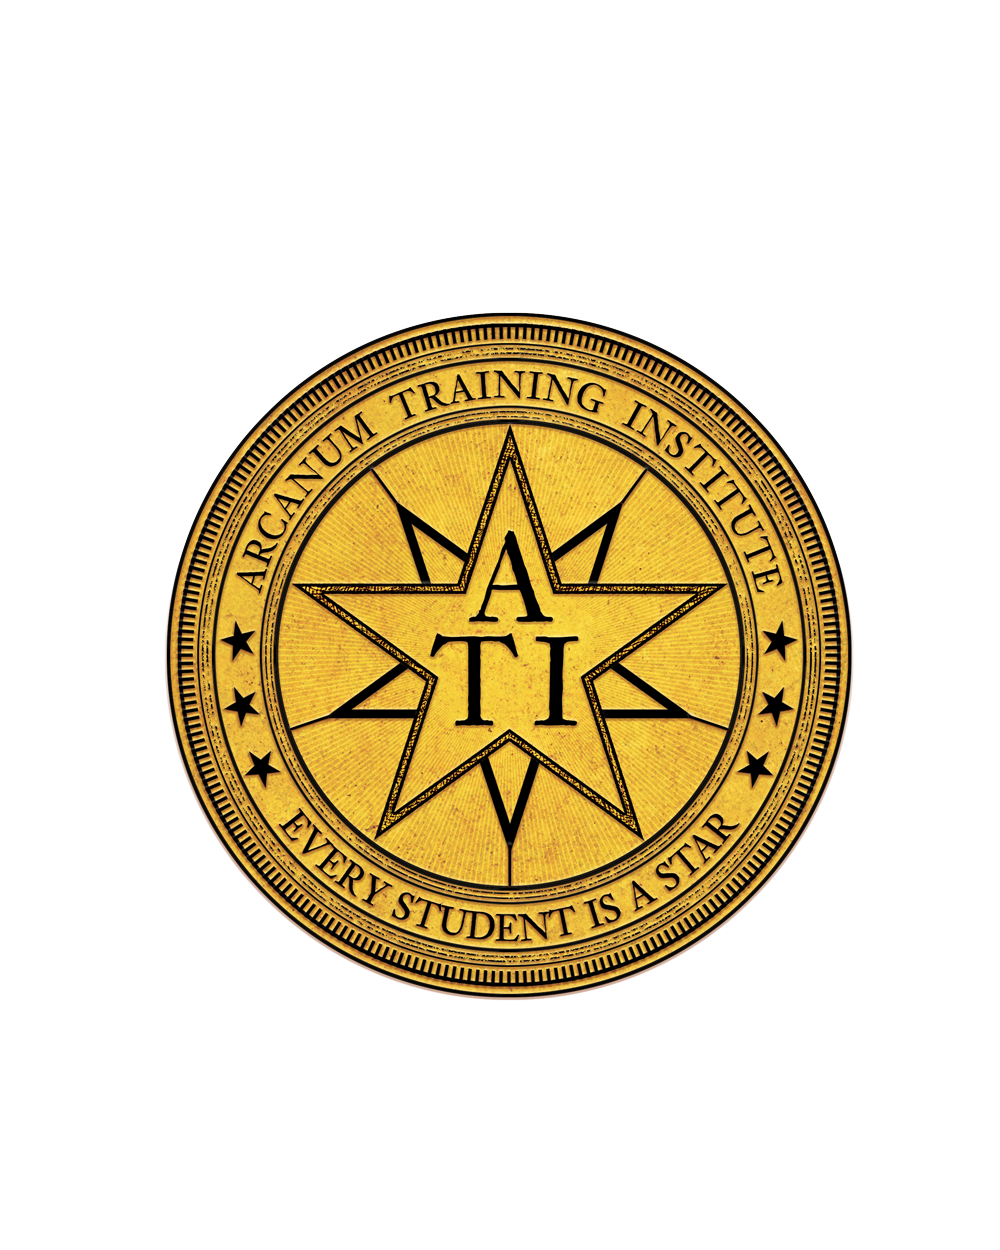 Golden seal with ATI initials inside a star with the text "Arcanum Institute" and "Every Student is a Star"